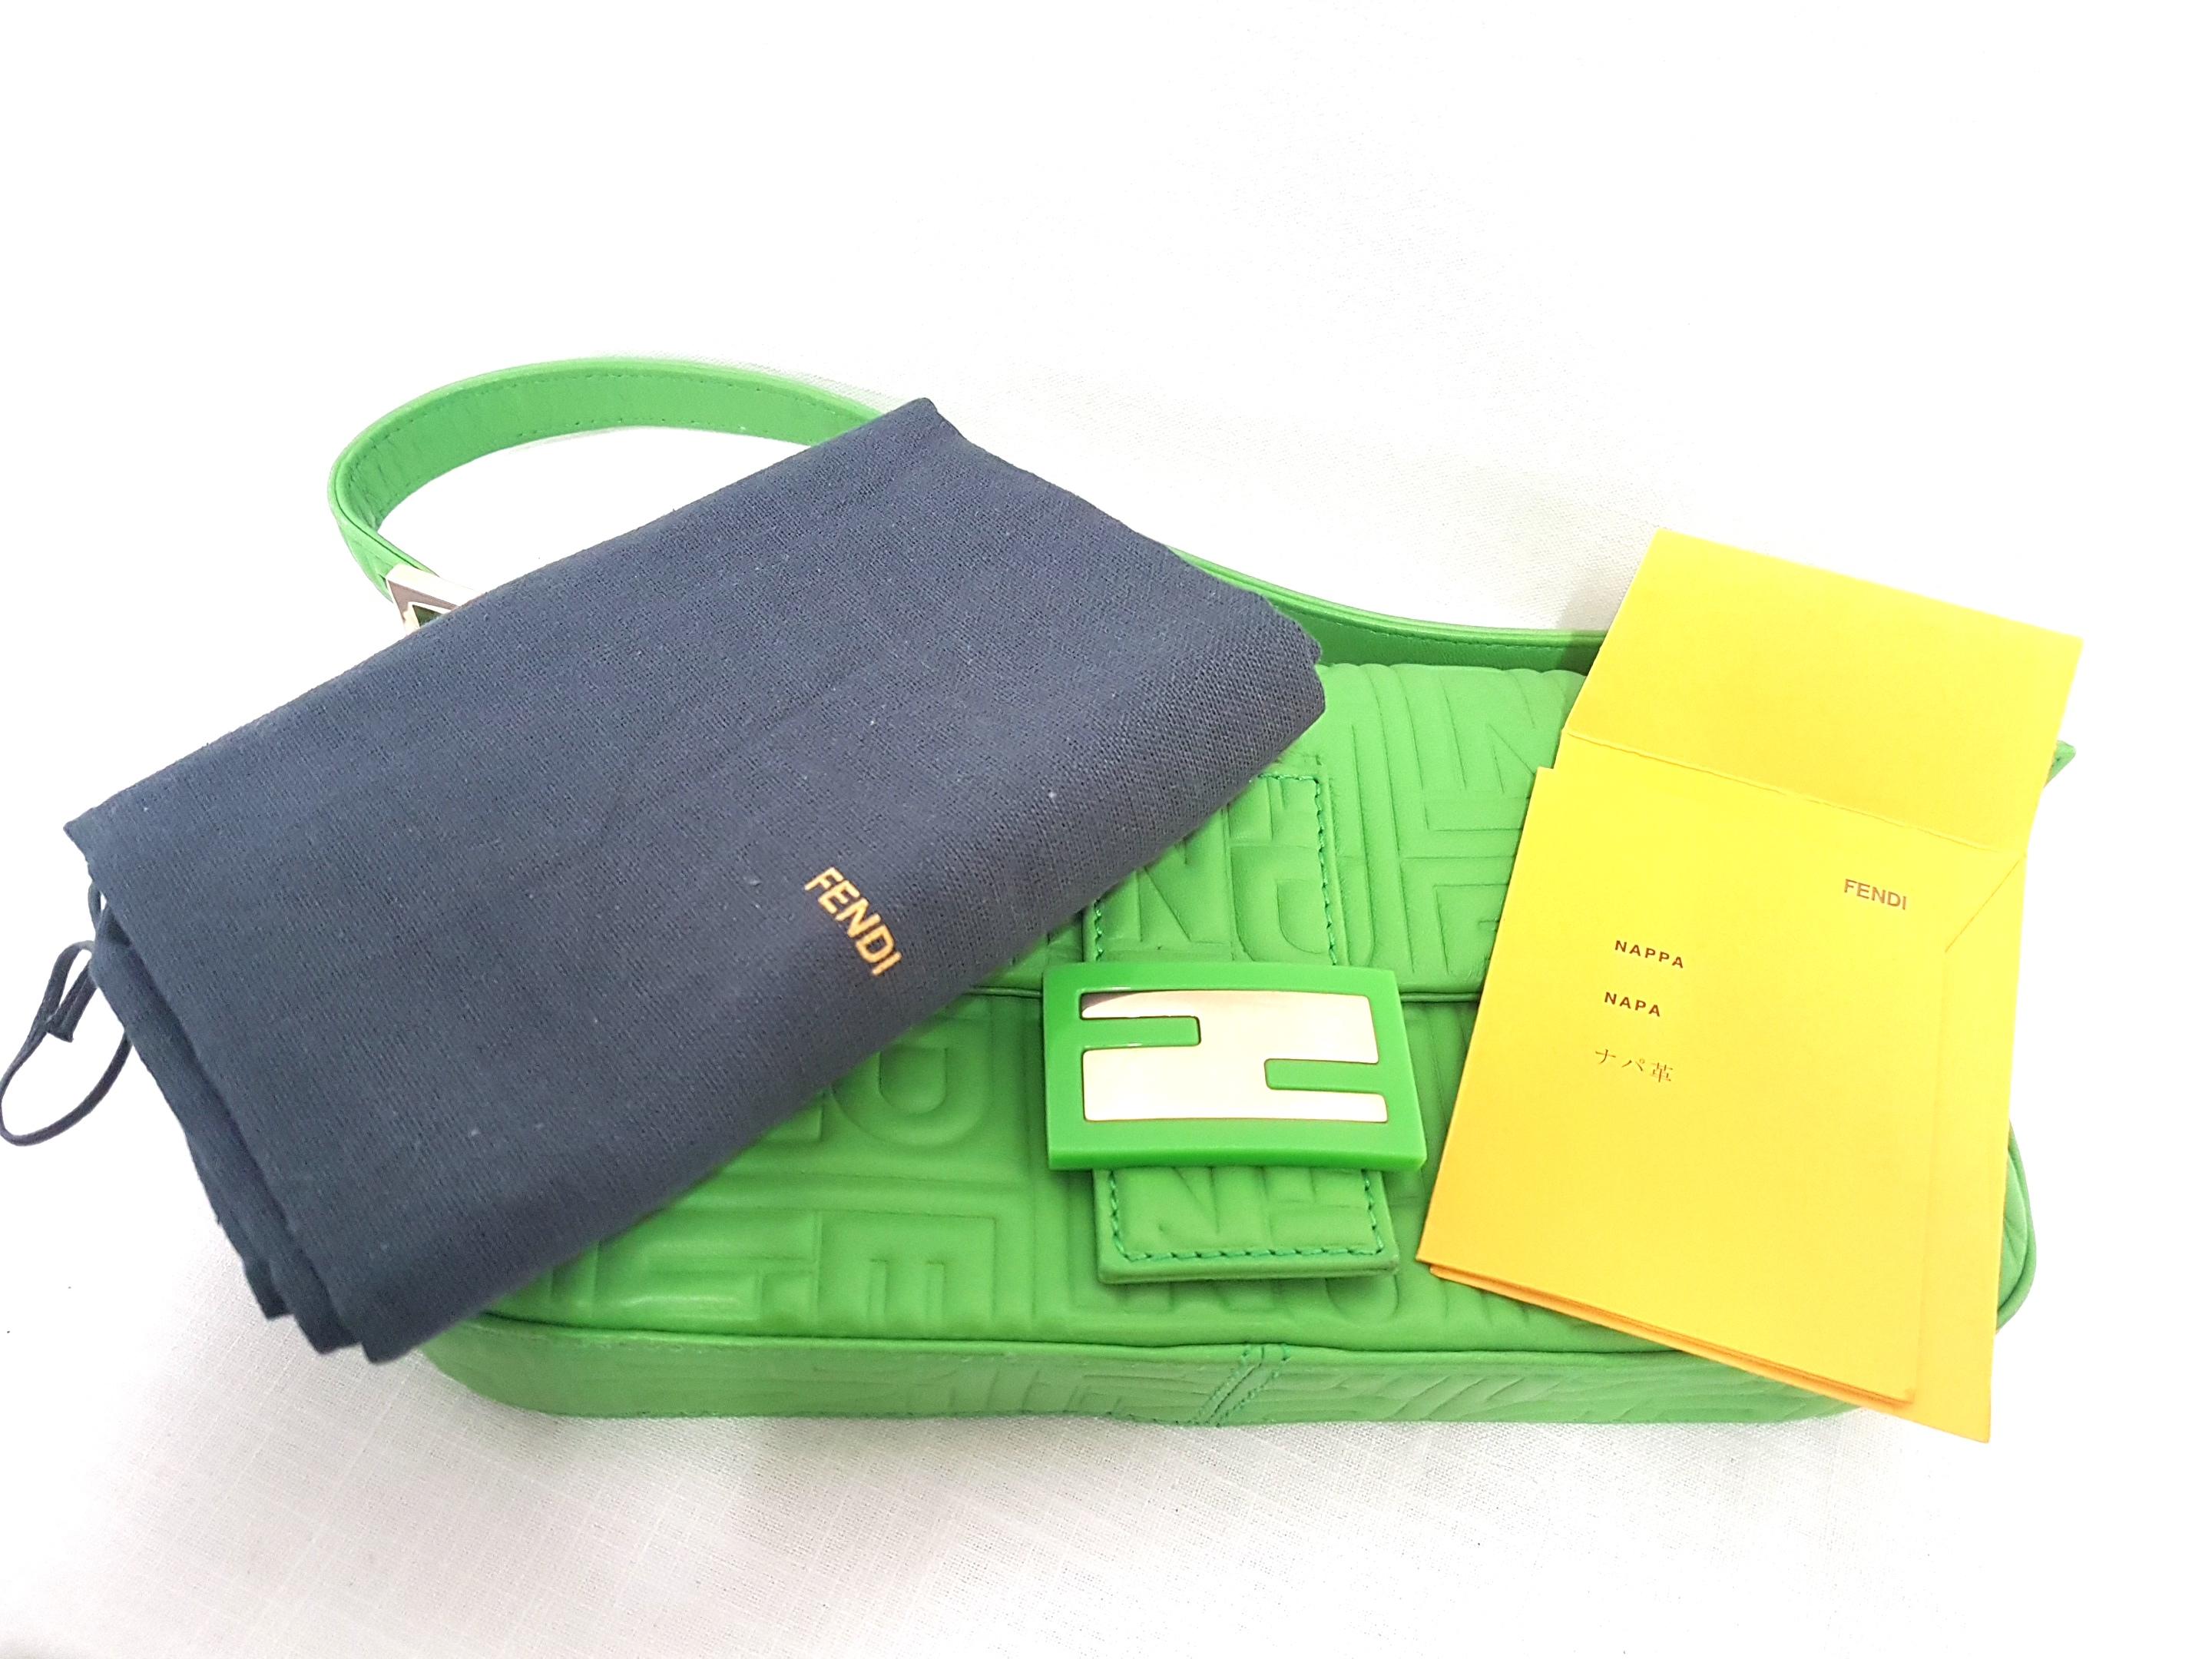 Beautiful Fendi Baguette Bag with adjustable shoulder strap.
Color : Green
Material : Nappa Leather
Original Dustbag included.
The item is in excellent condition.